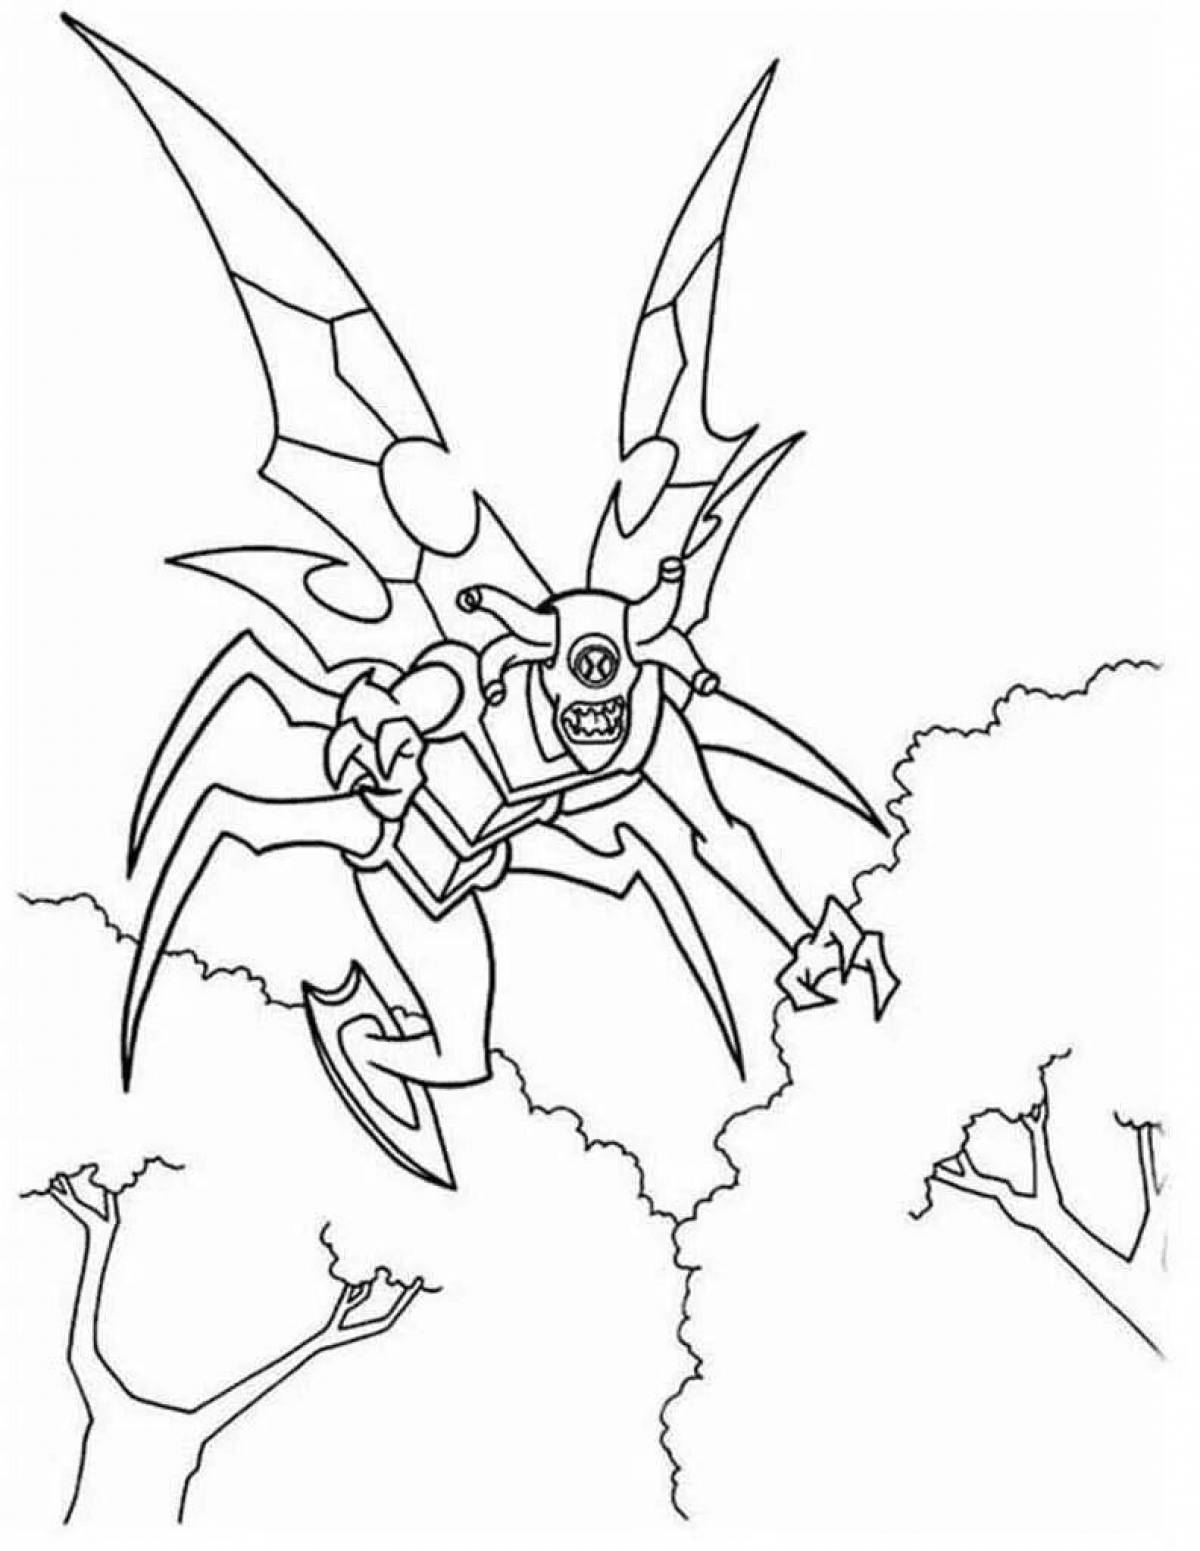 Attraction benten 10 coloring pages